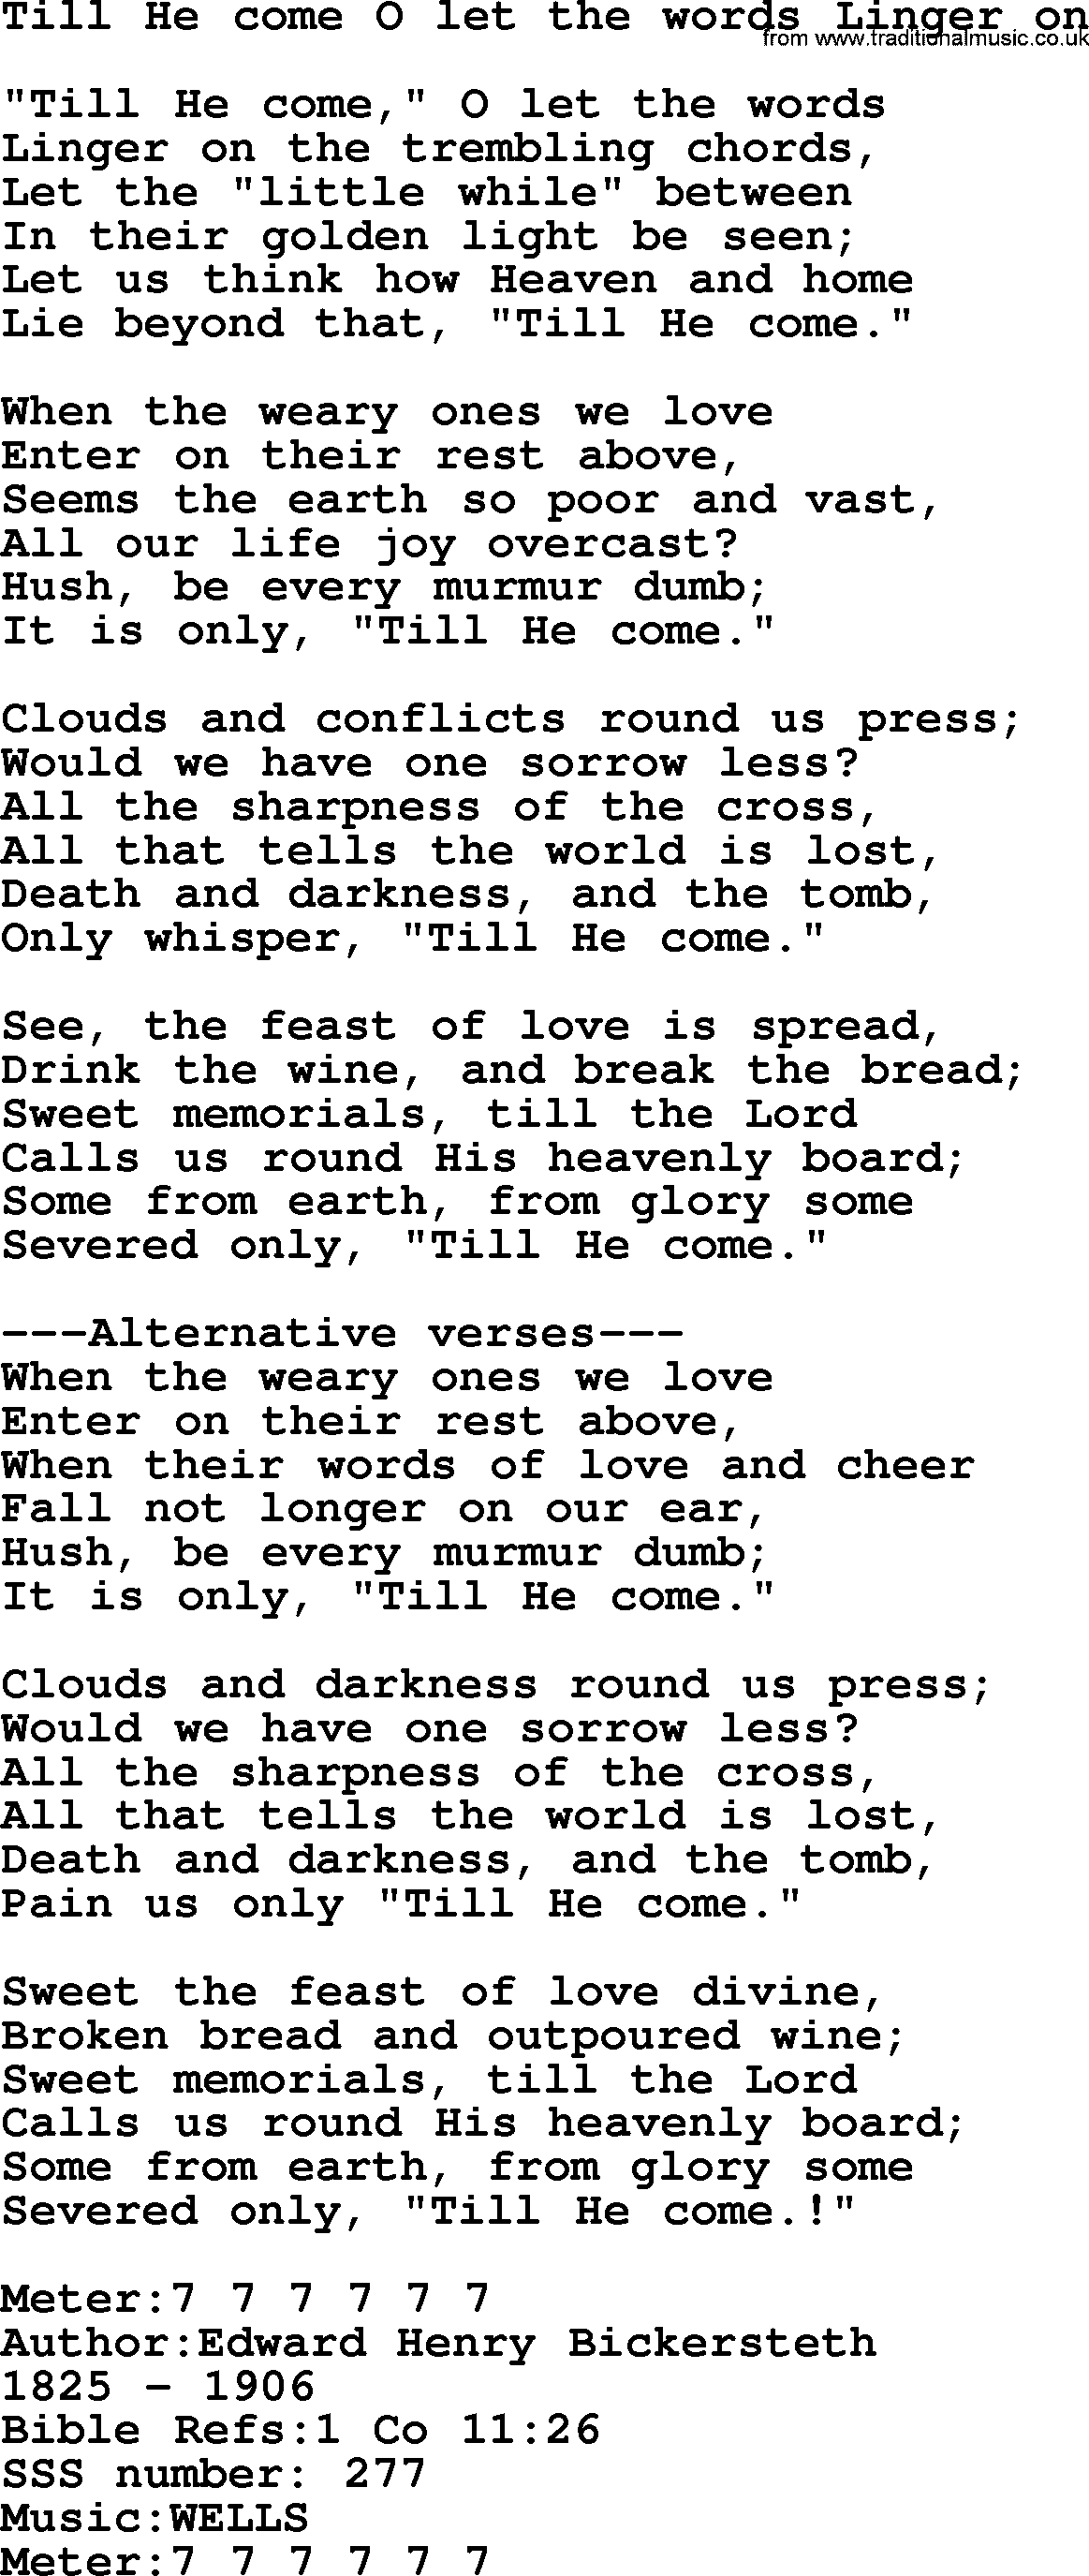 Sacred Songs and Solos complete, 1200 Hymns, title: Till He Come O Let The Words Linger On, lyrics and PDF